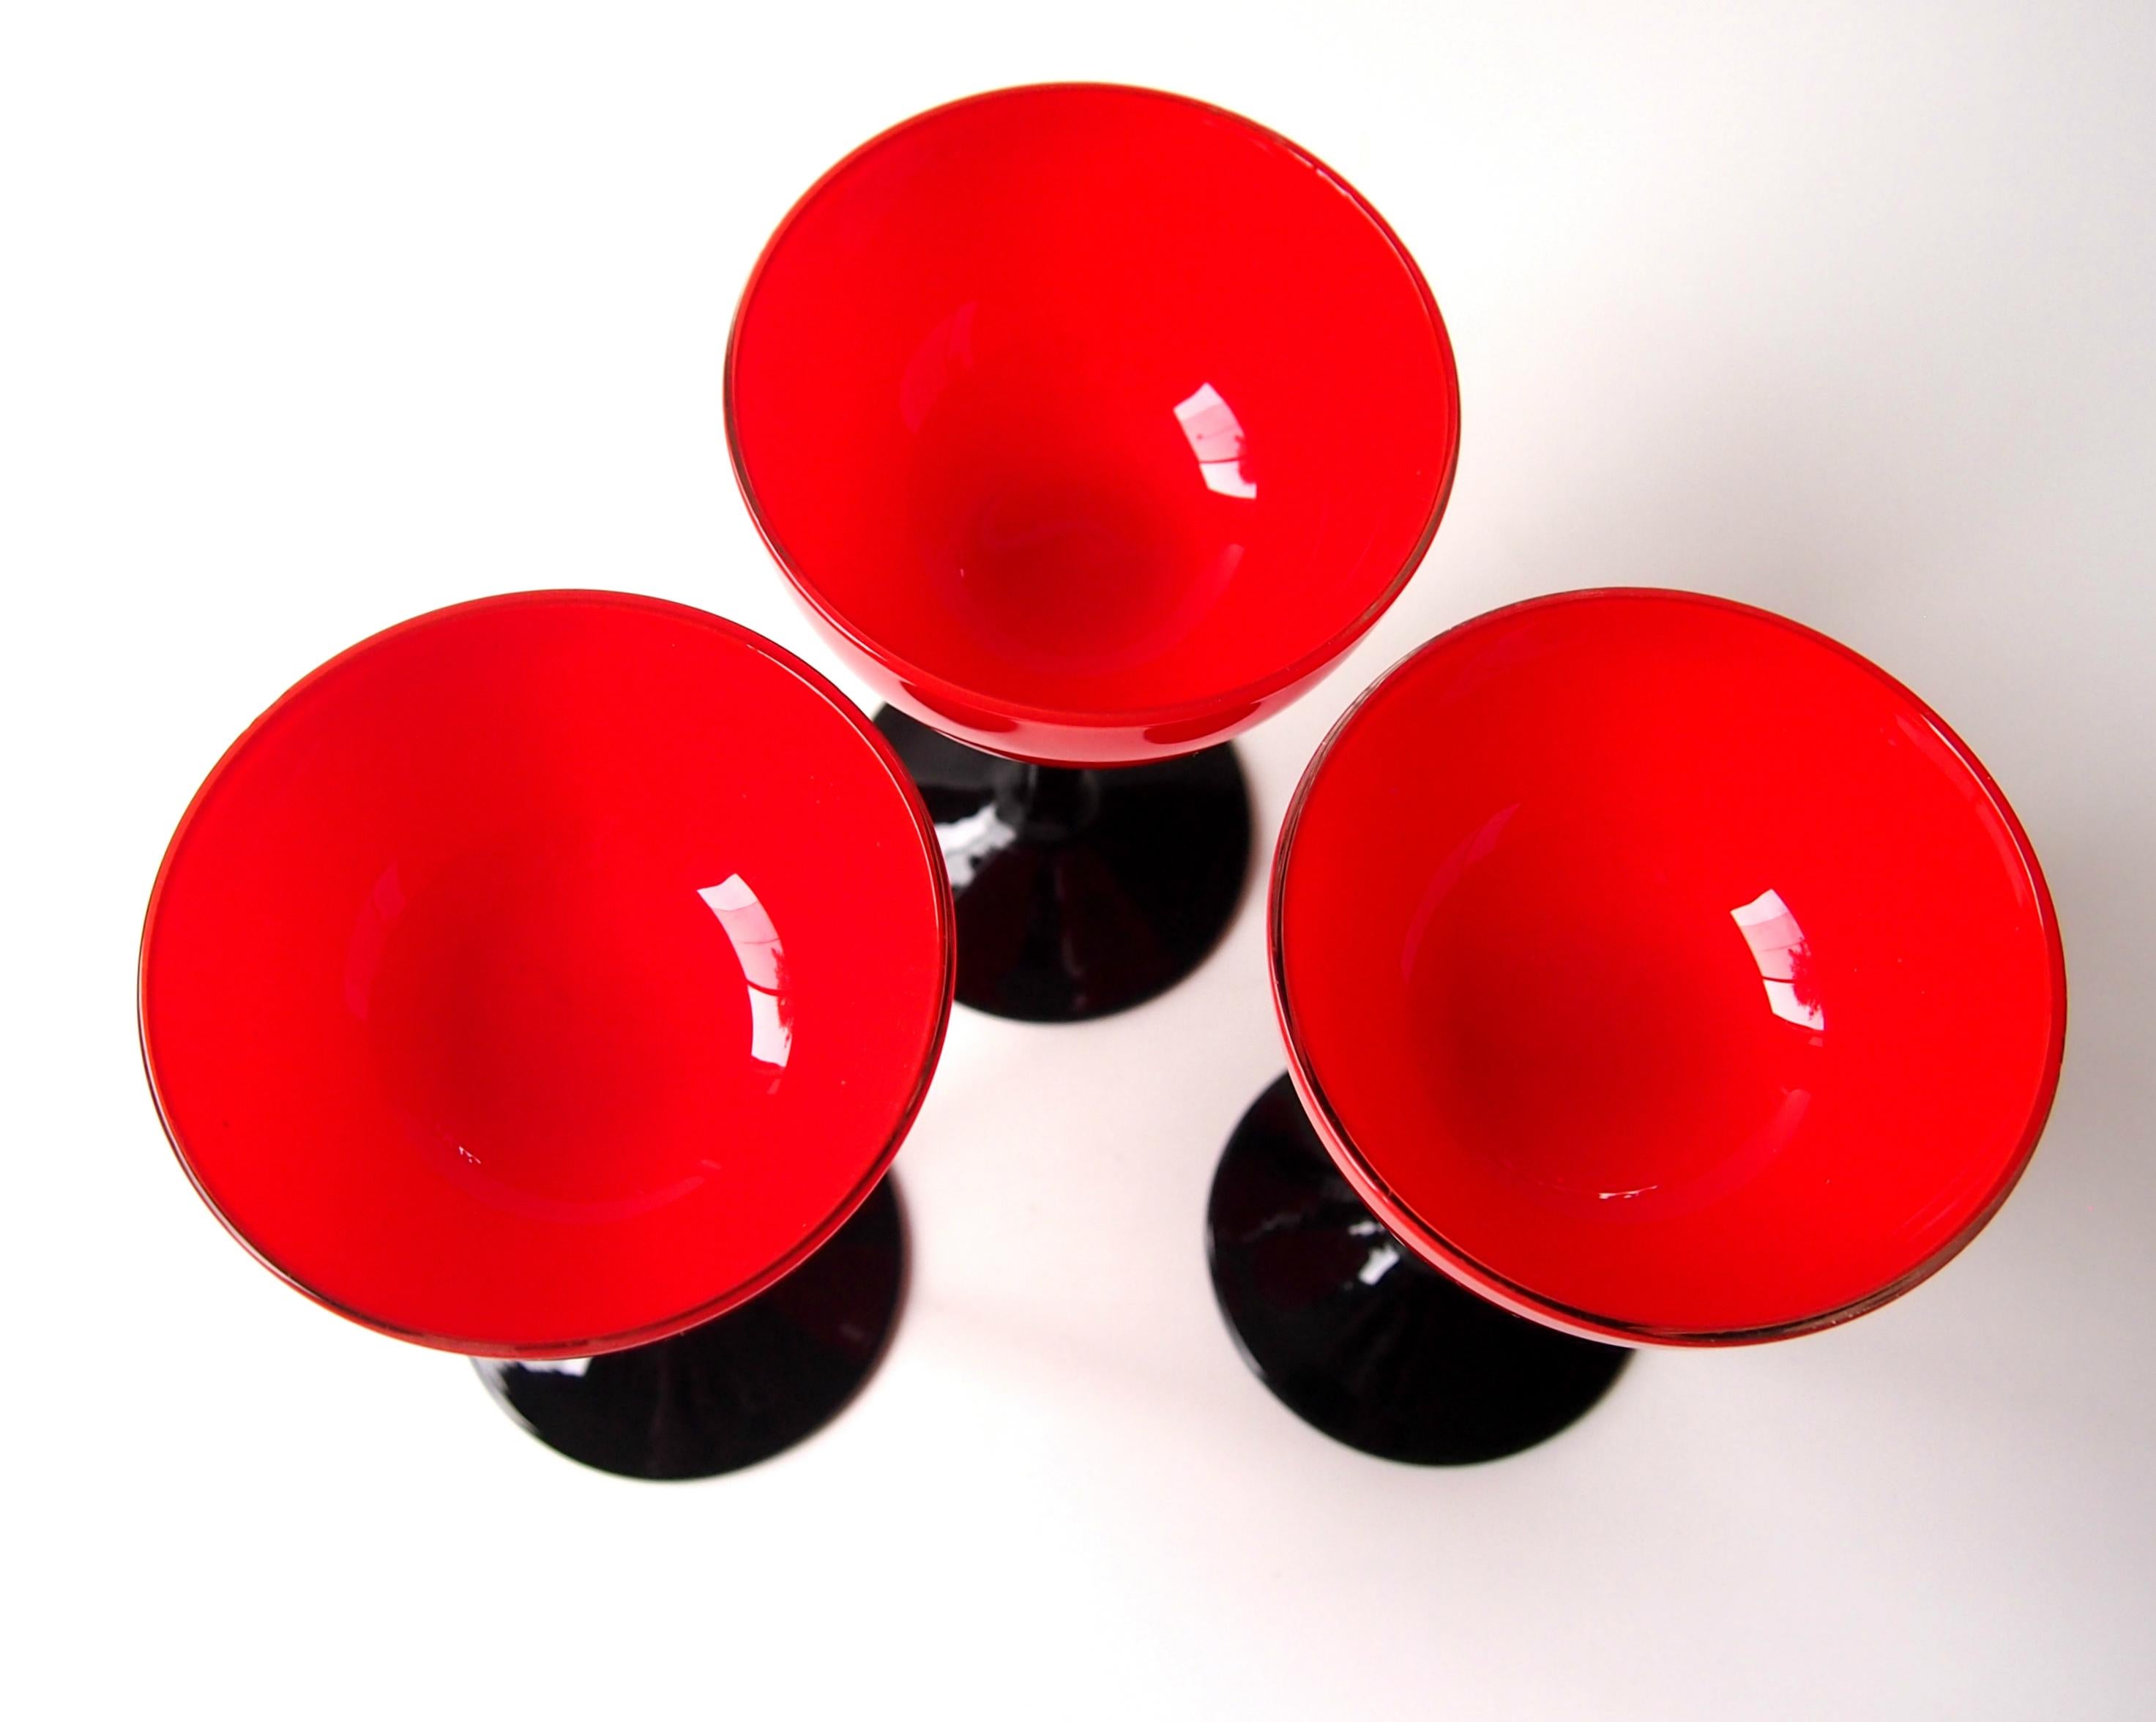 Dramatic Trio of 'Tango' Art Deco Harrach wine glasses in vibrant red on black stems. Bohemian Tango ware was very popular in the USA in the 1920s and 30s and it was made by many companies. There are most likely Harrach but it is not always possible